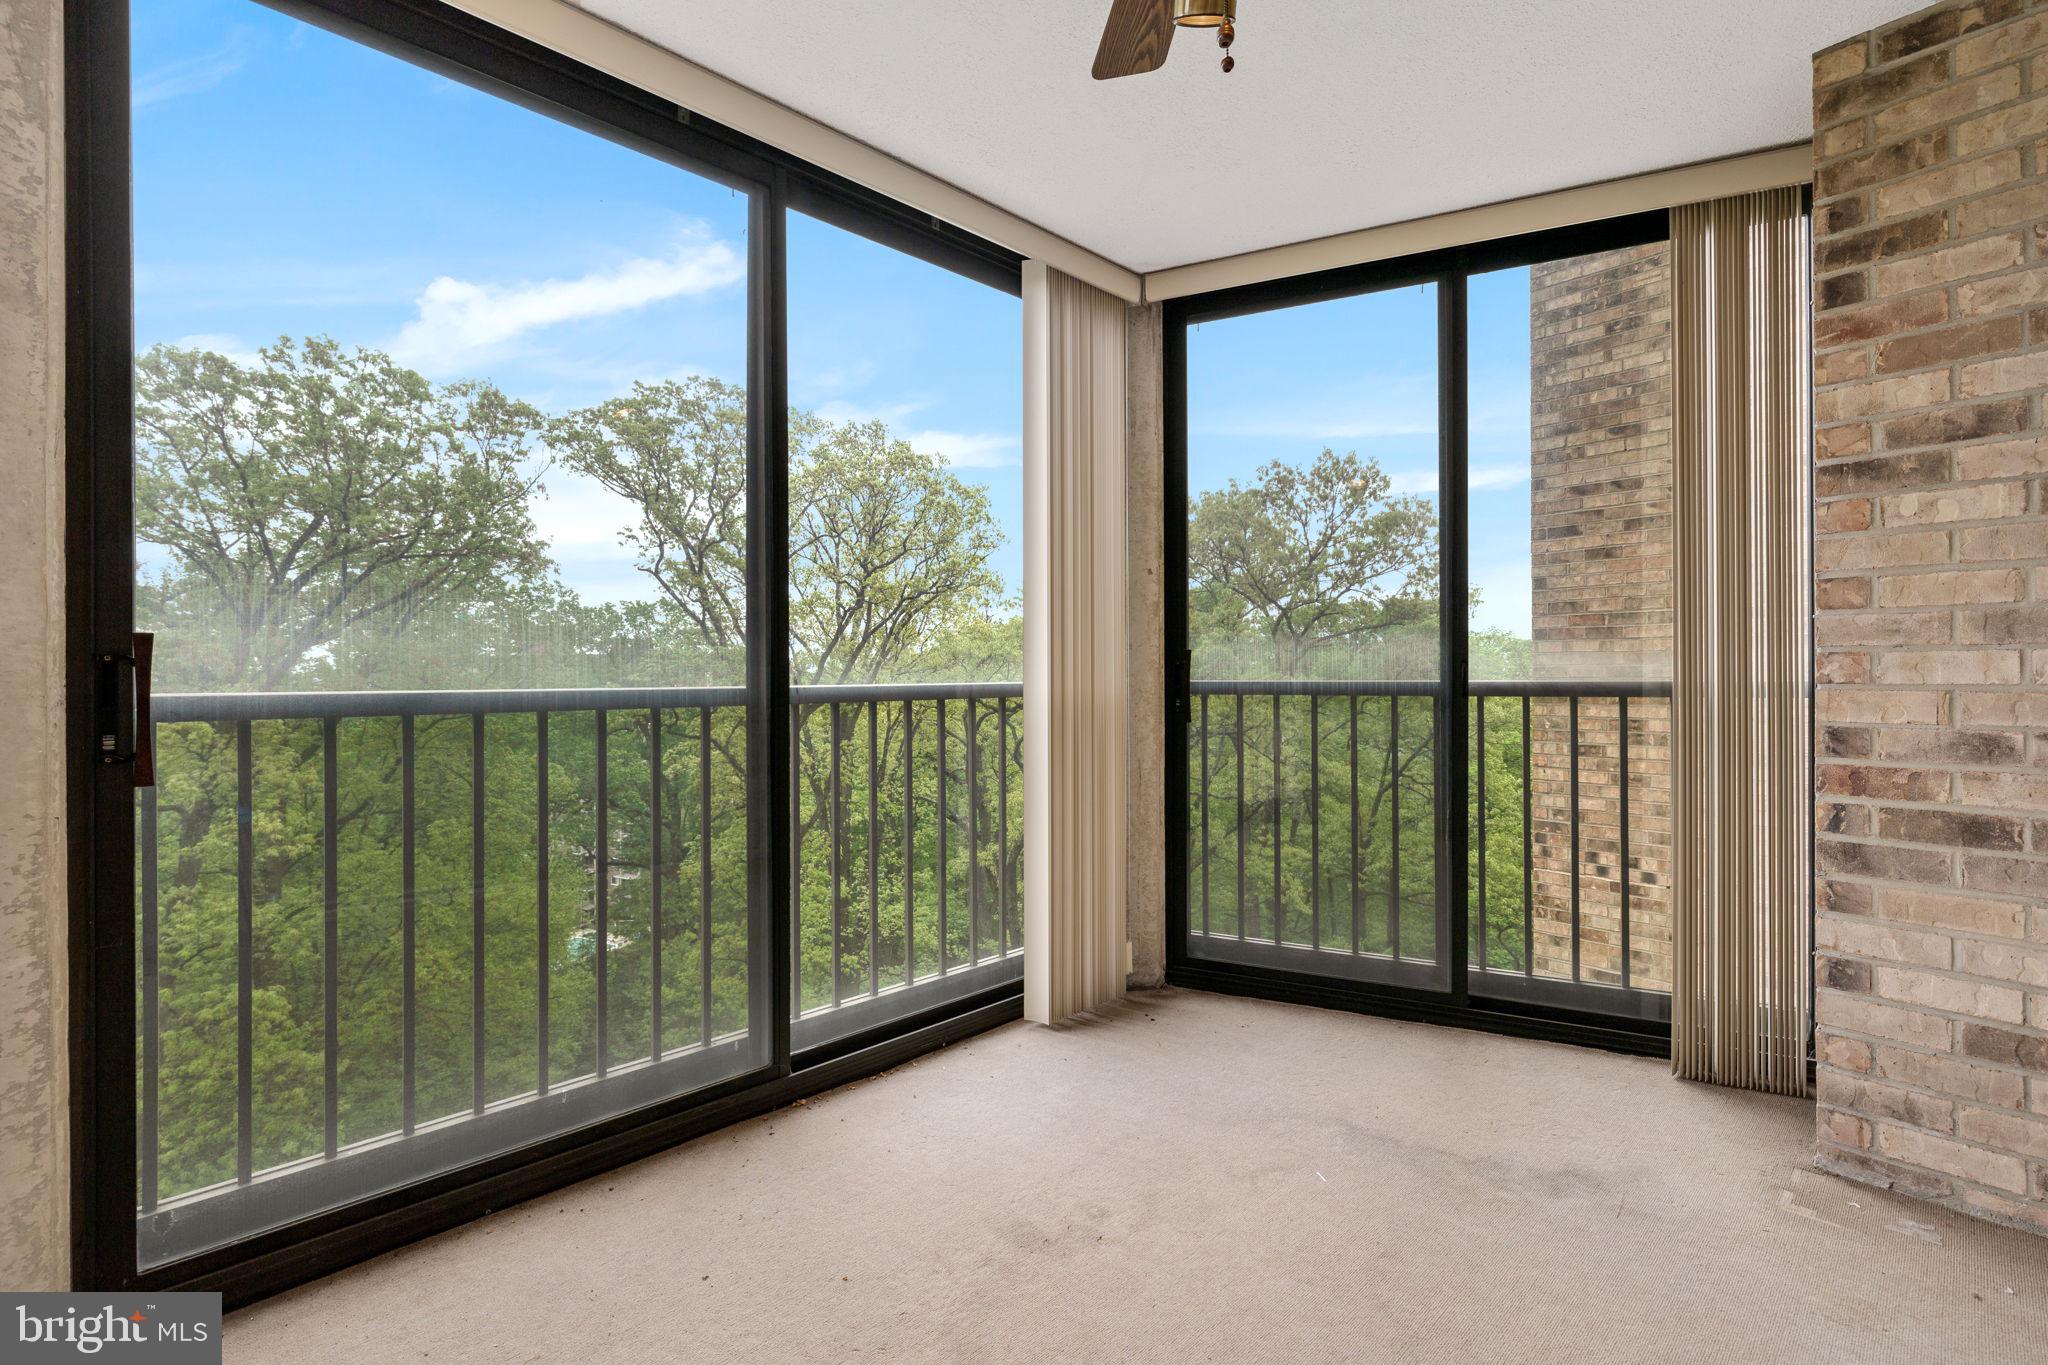 a view of a room with sliding windows